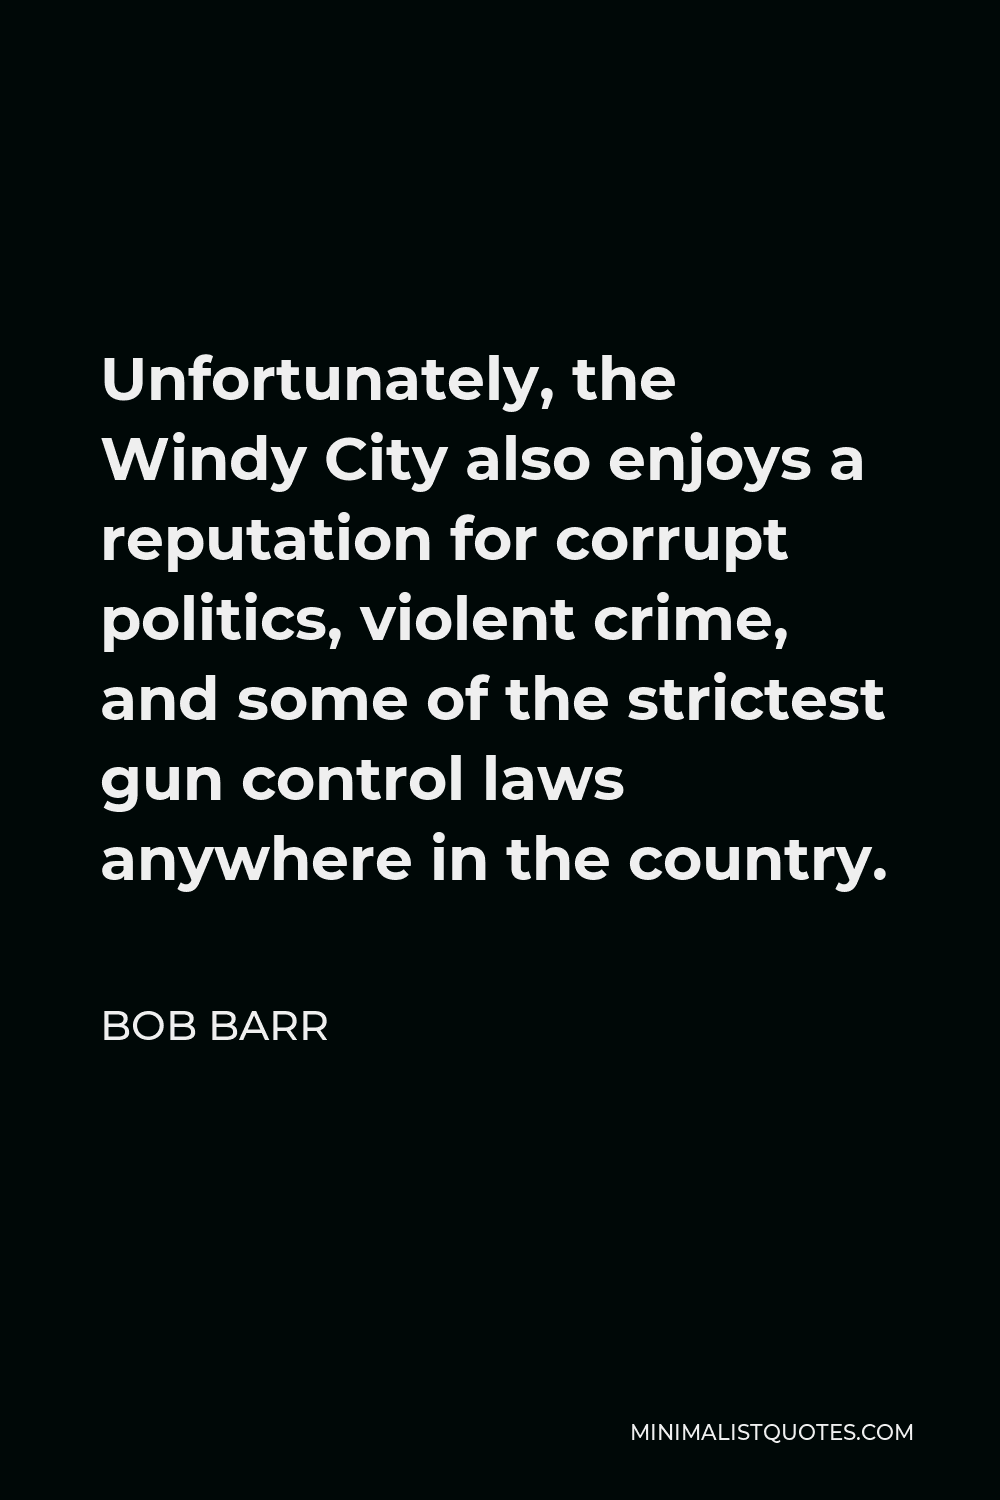 Bob Barr Quote - Unfortunately, the Windy City also enjoys a reputation for corrupt politics, violent crime, and some of the strictest gun control laws anywhere in the country.